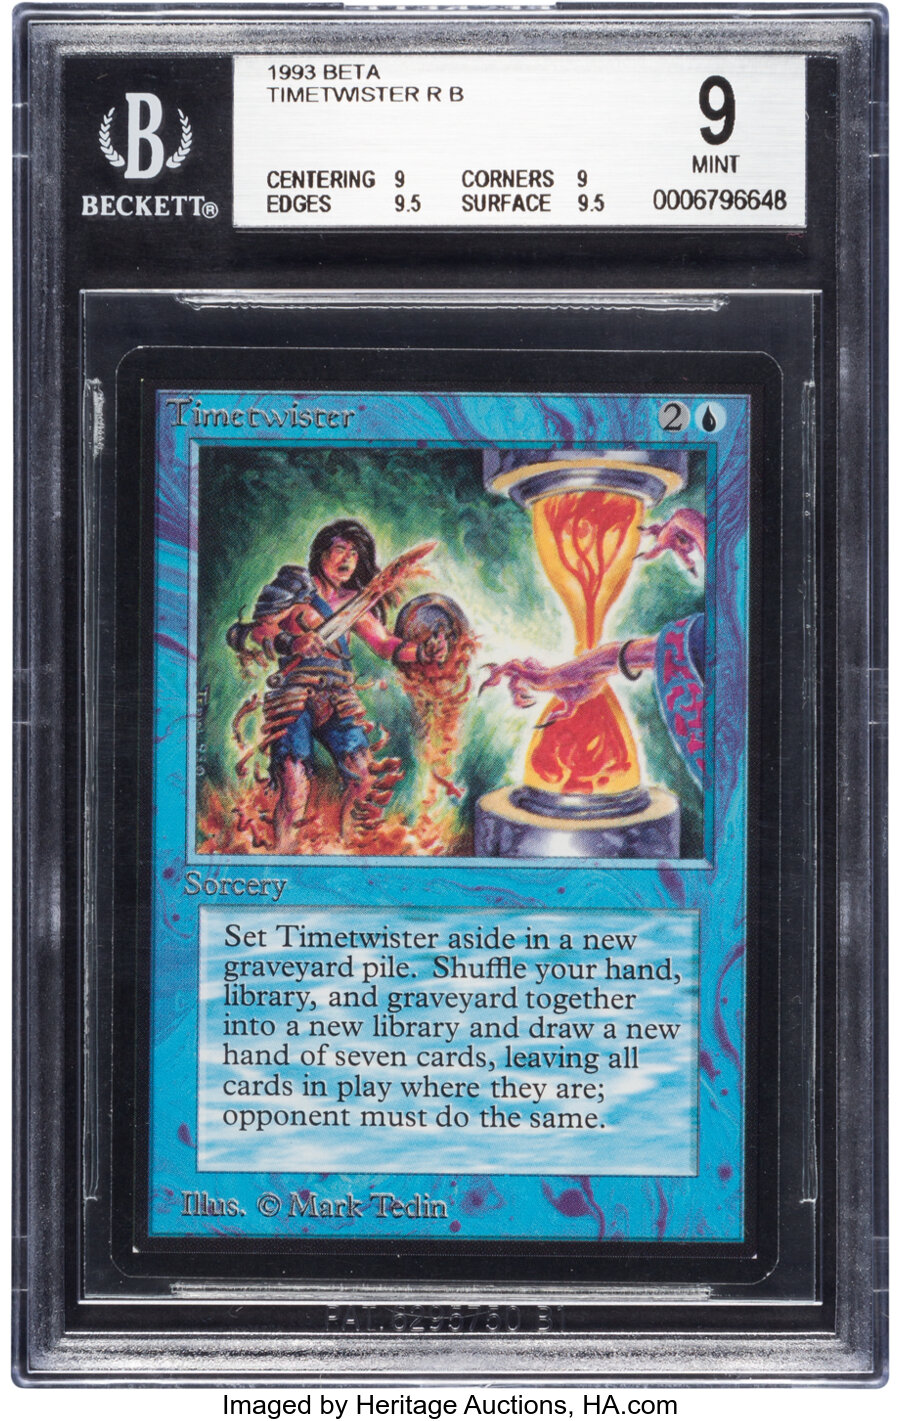 Magic: The Gathering Timetwister Beta Edition Trading Card (Wizards of the Coast, 1993) BGS MINT 9